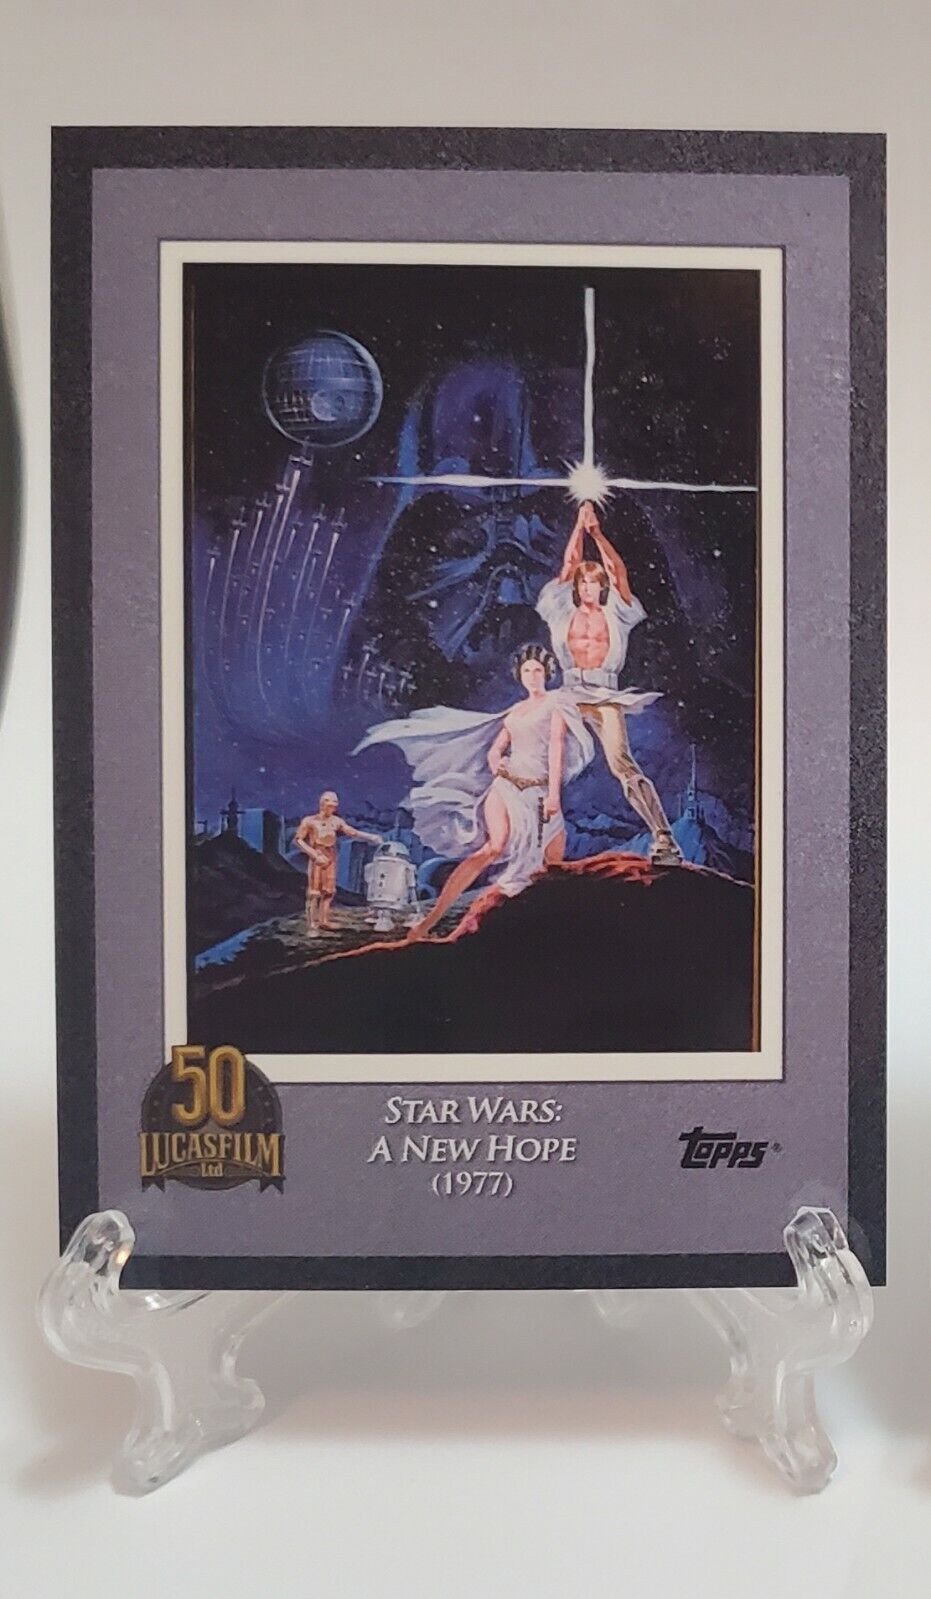 2021 Topps Star Wars Lucasfilm 50th Anniversary A New Hope Card #1